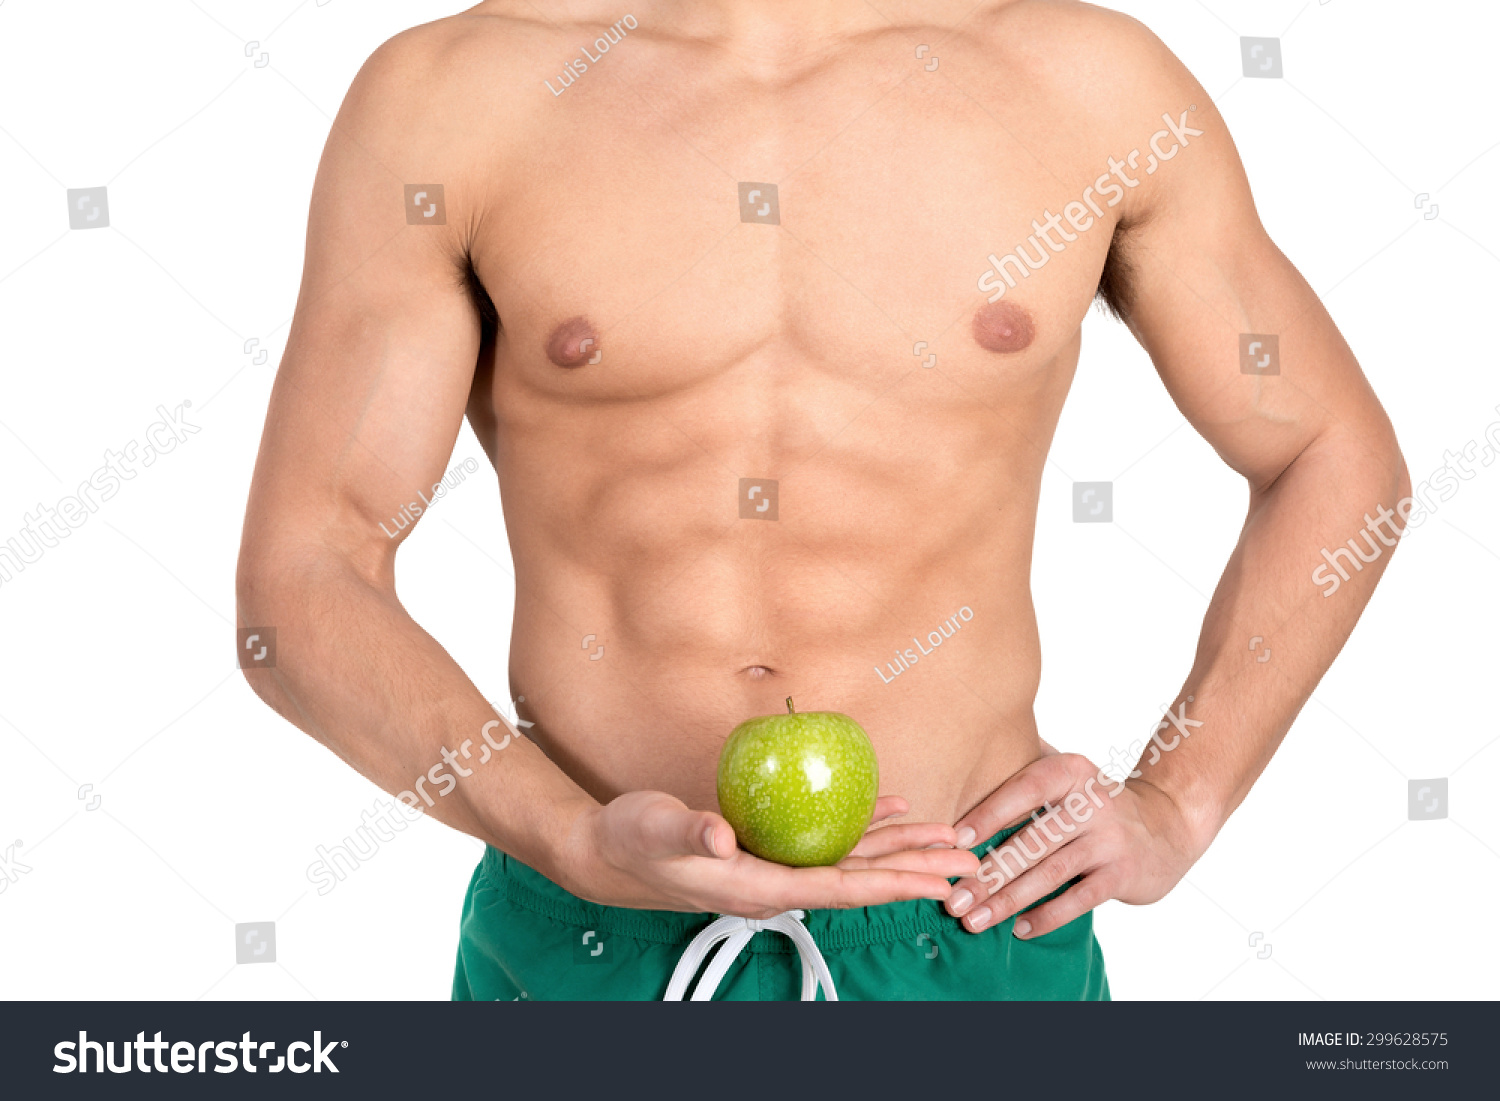 Man's abdominal muscles detail holding an apple isolated in white #299628575